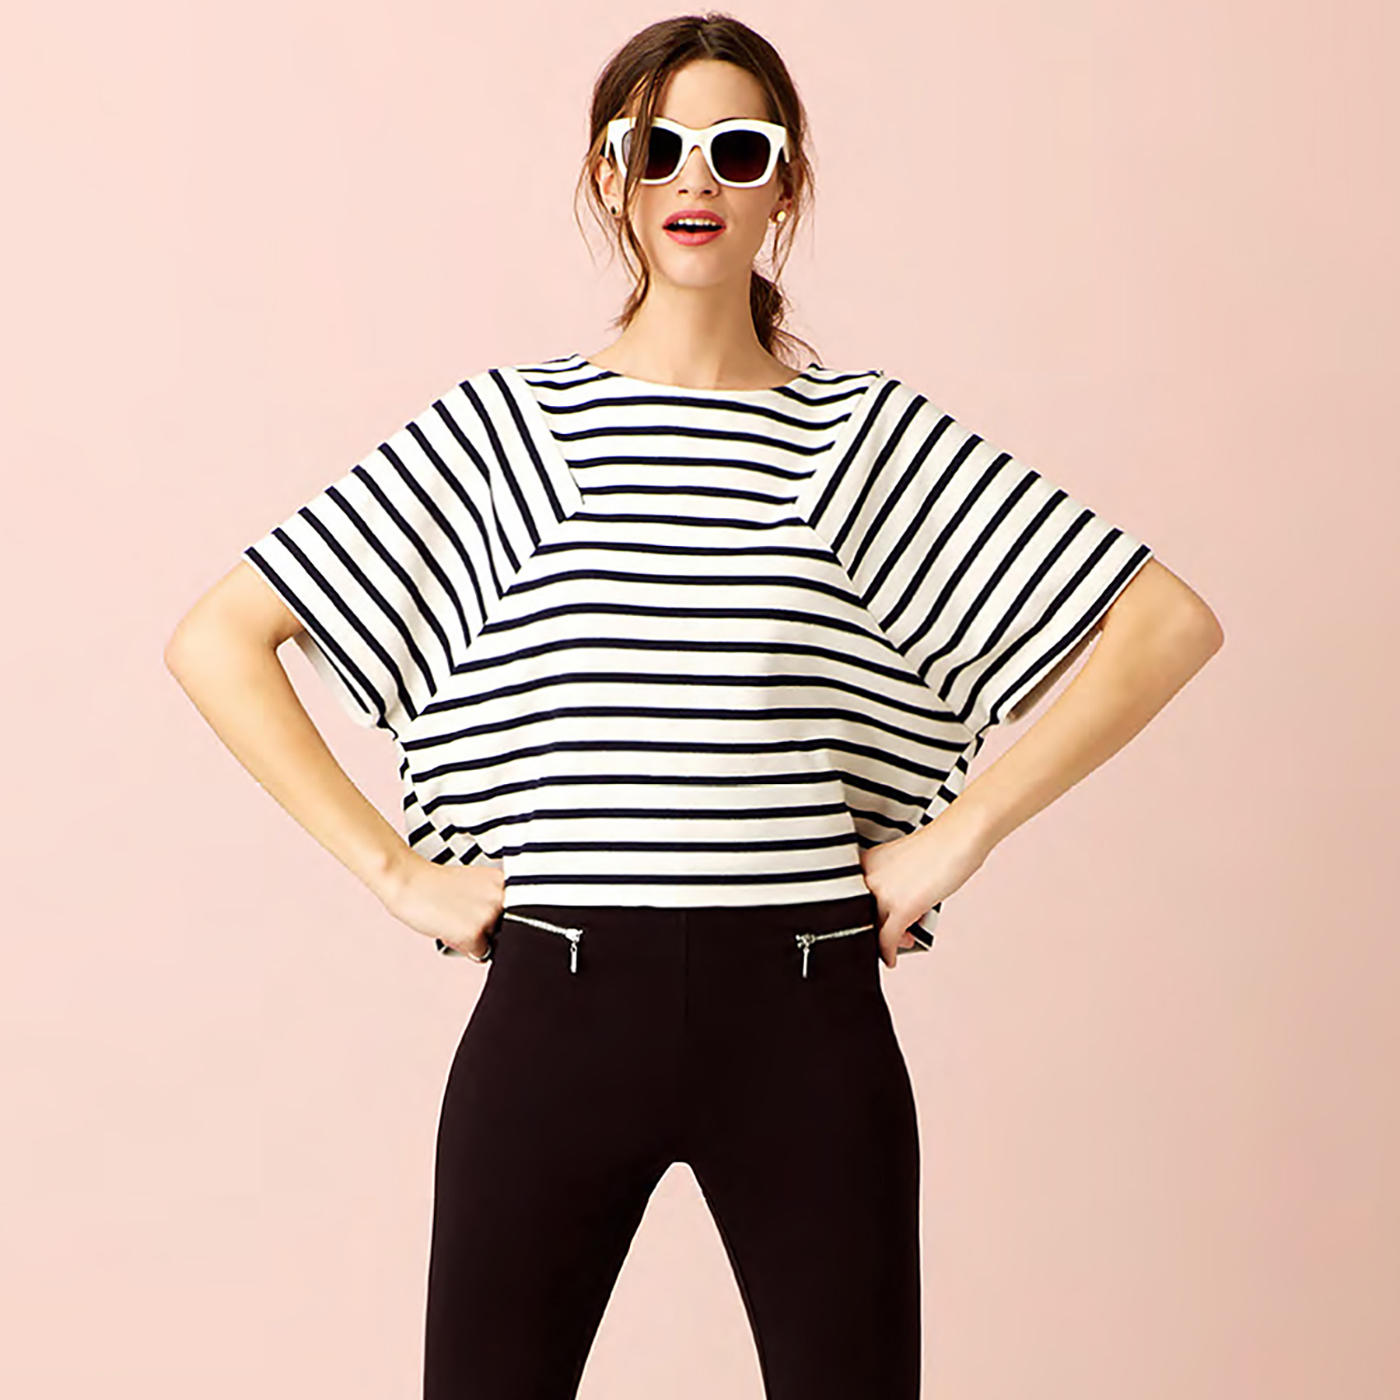 Simply Styled Women's T-Shirt - Striped